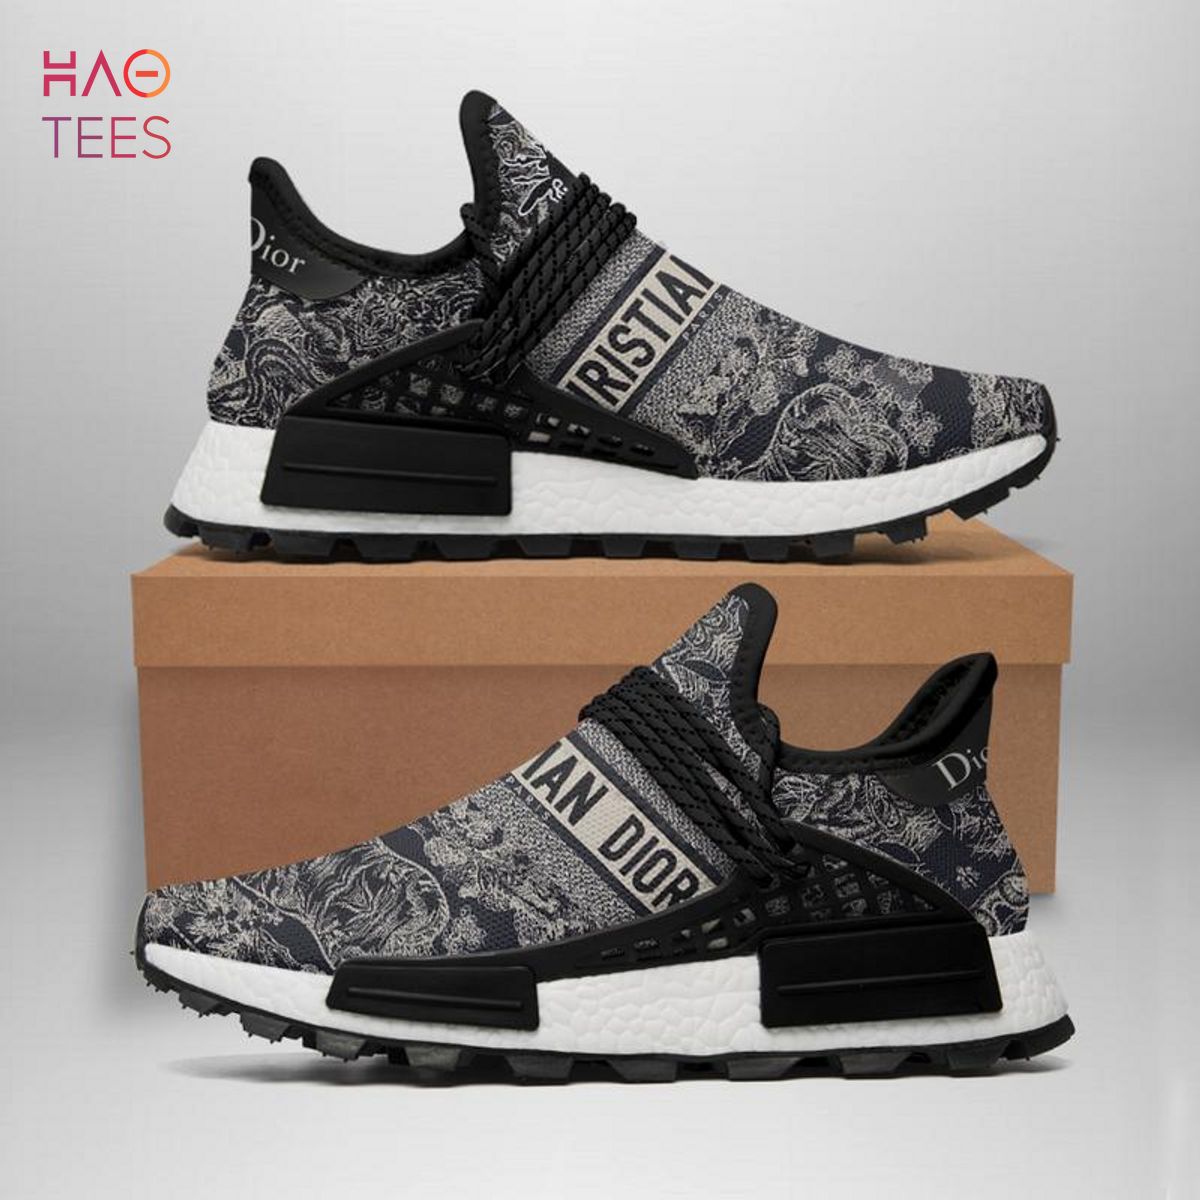 Gucci Black NMD Human Race Shoes Sneakers